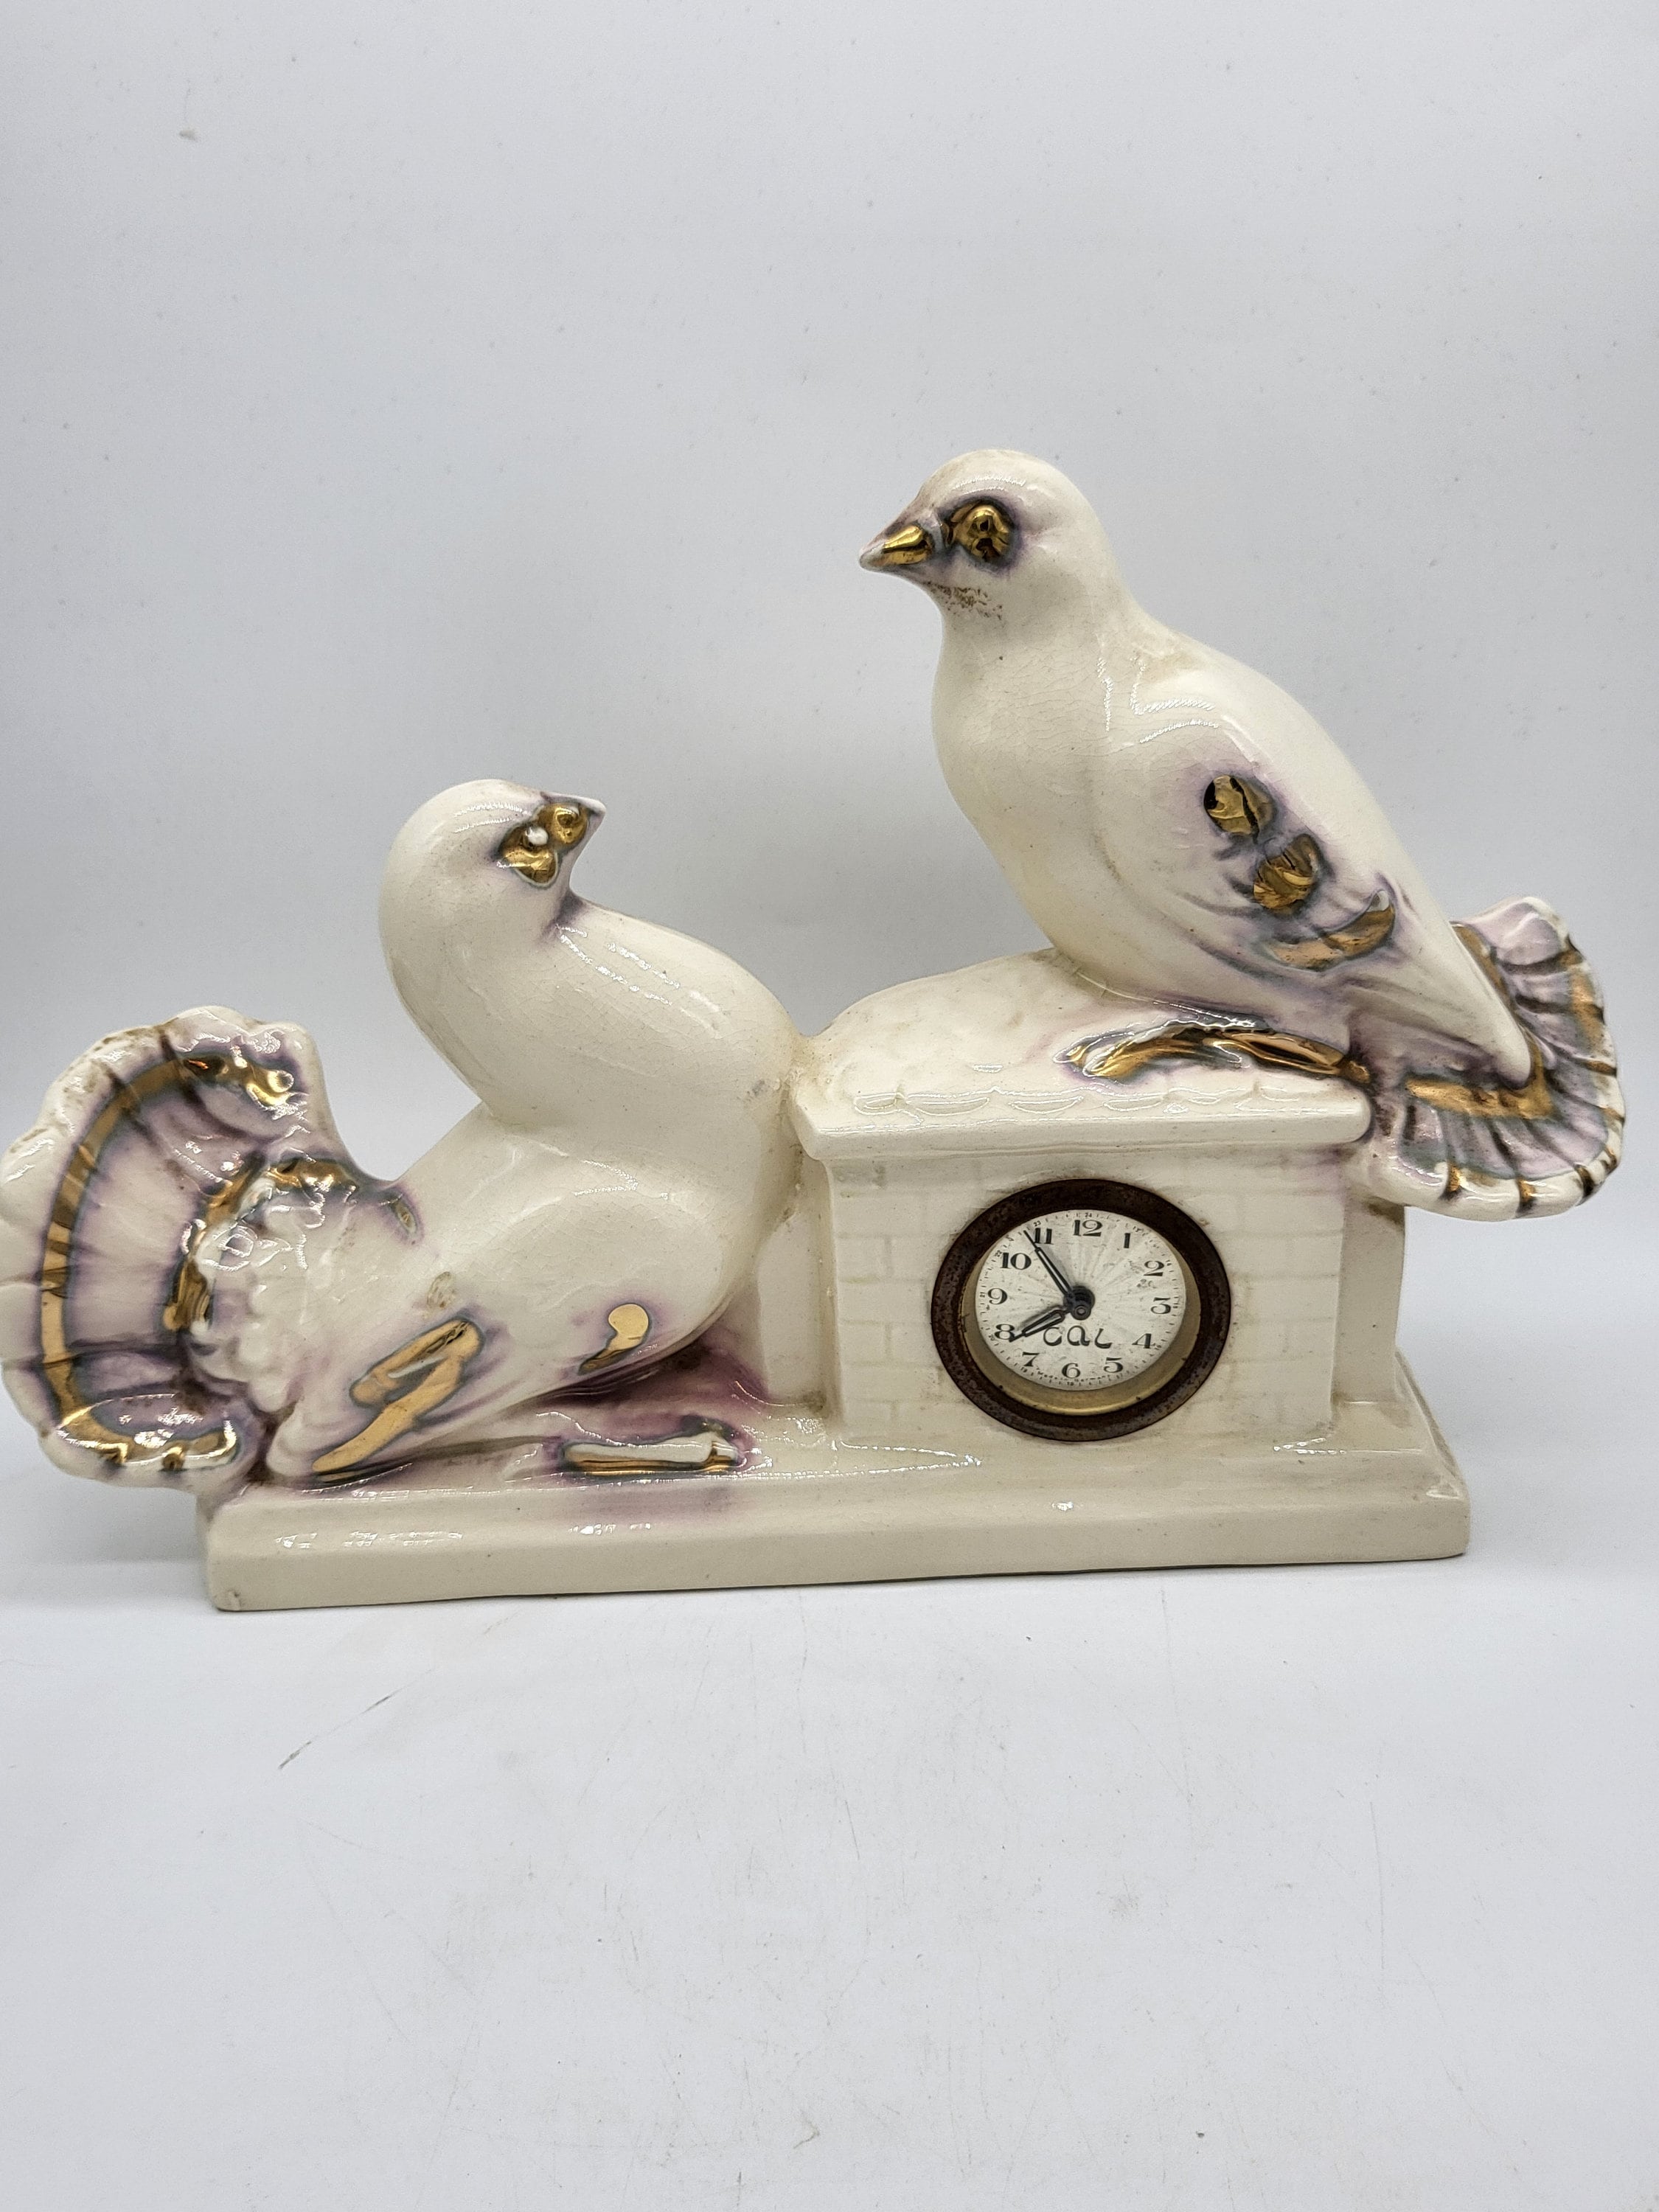 Alarm Clock Salt and Pepper Shakers - collectibles - by owner - sale -  craigslist